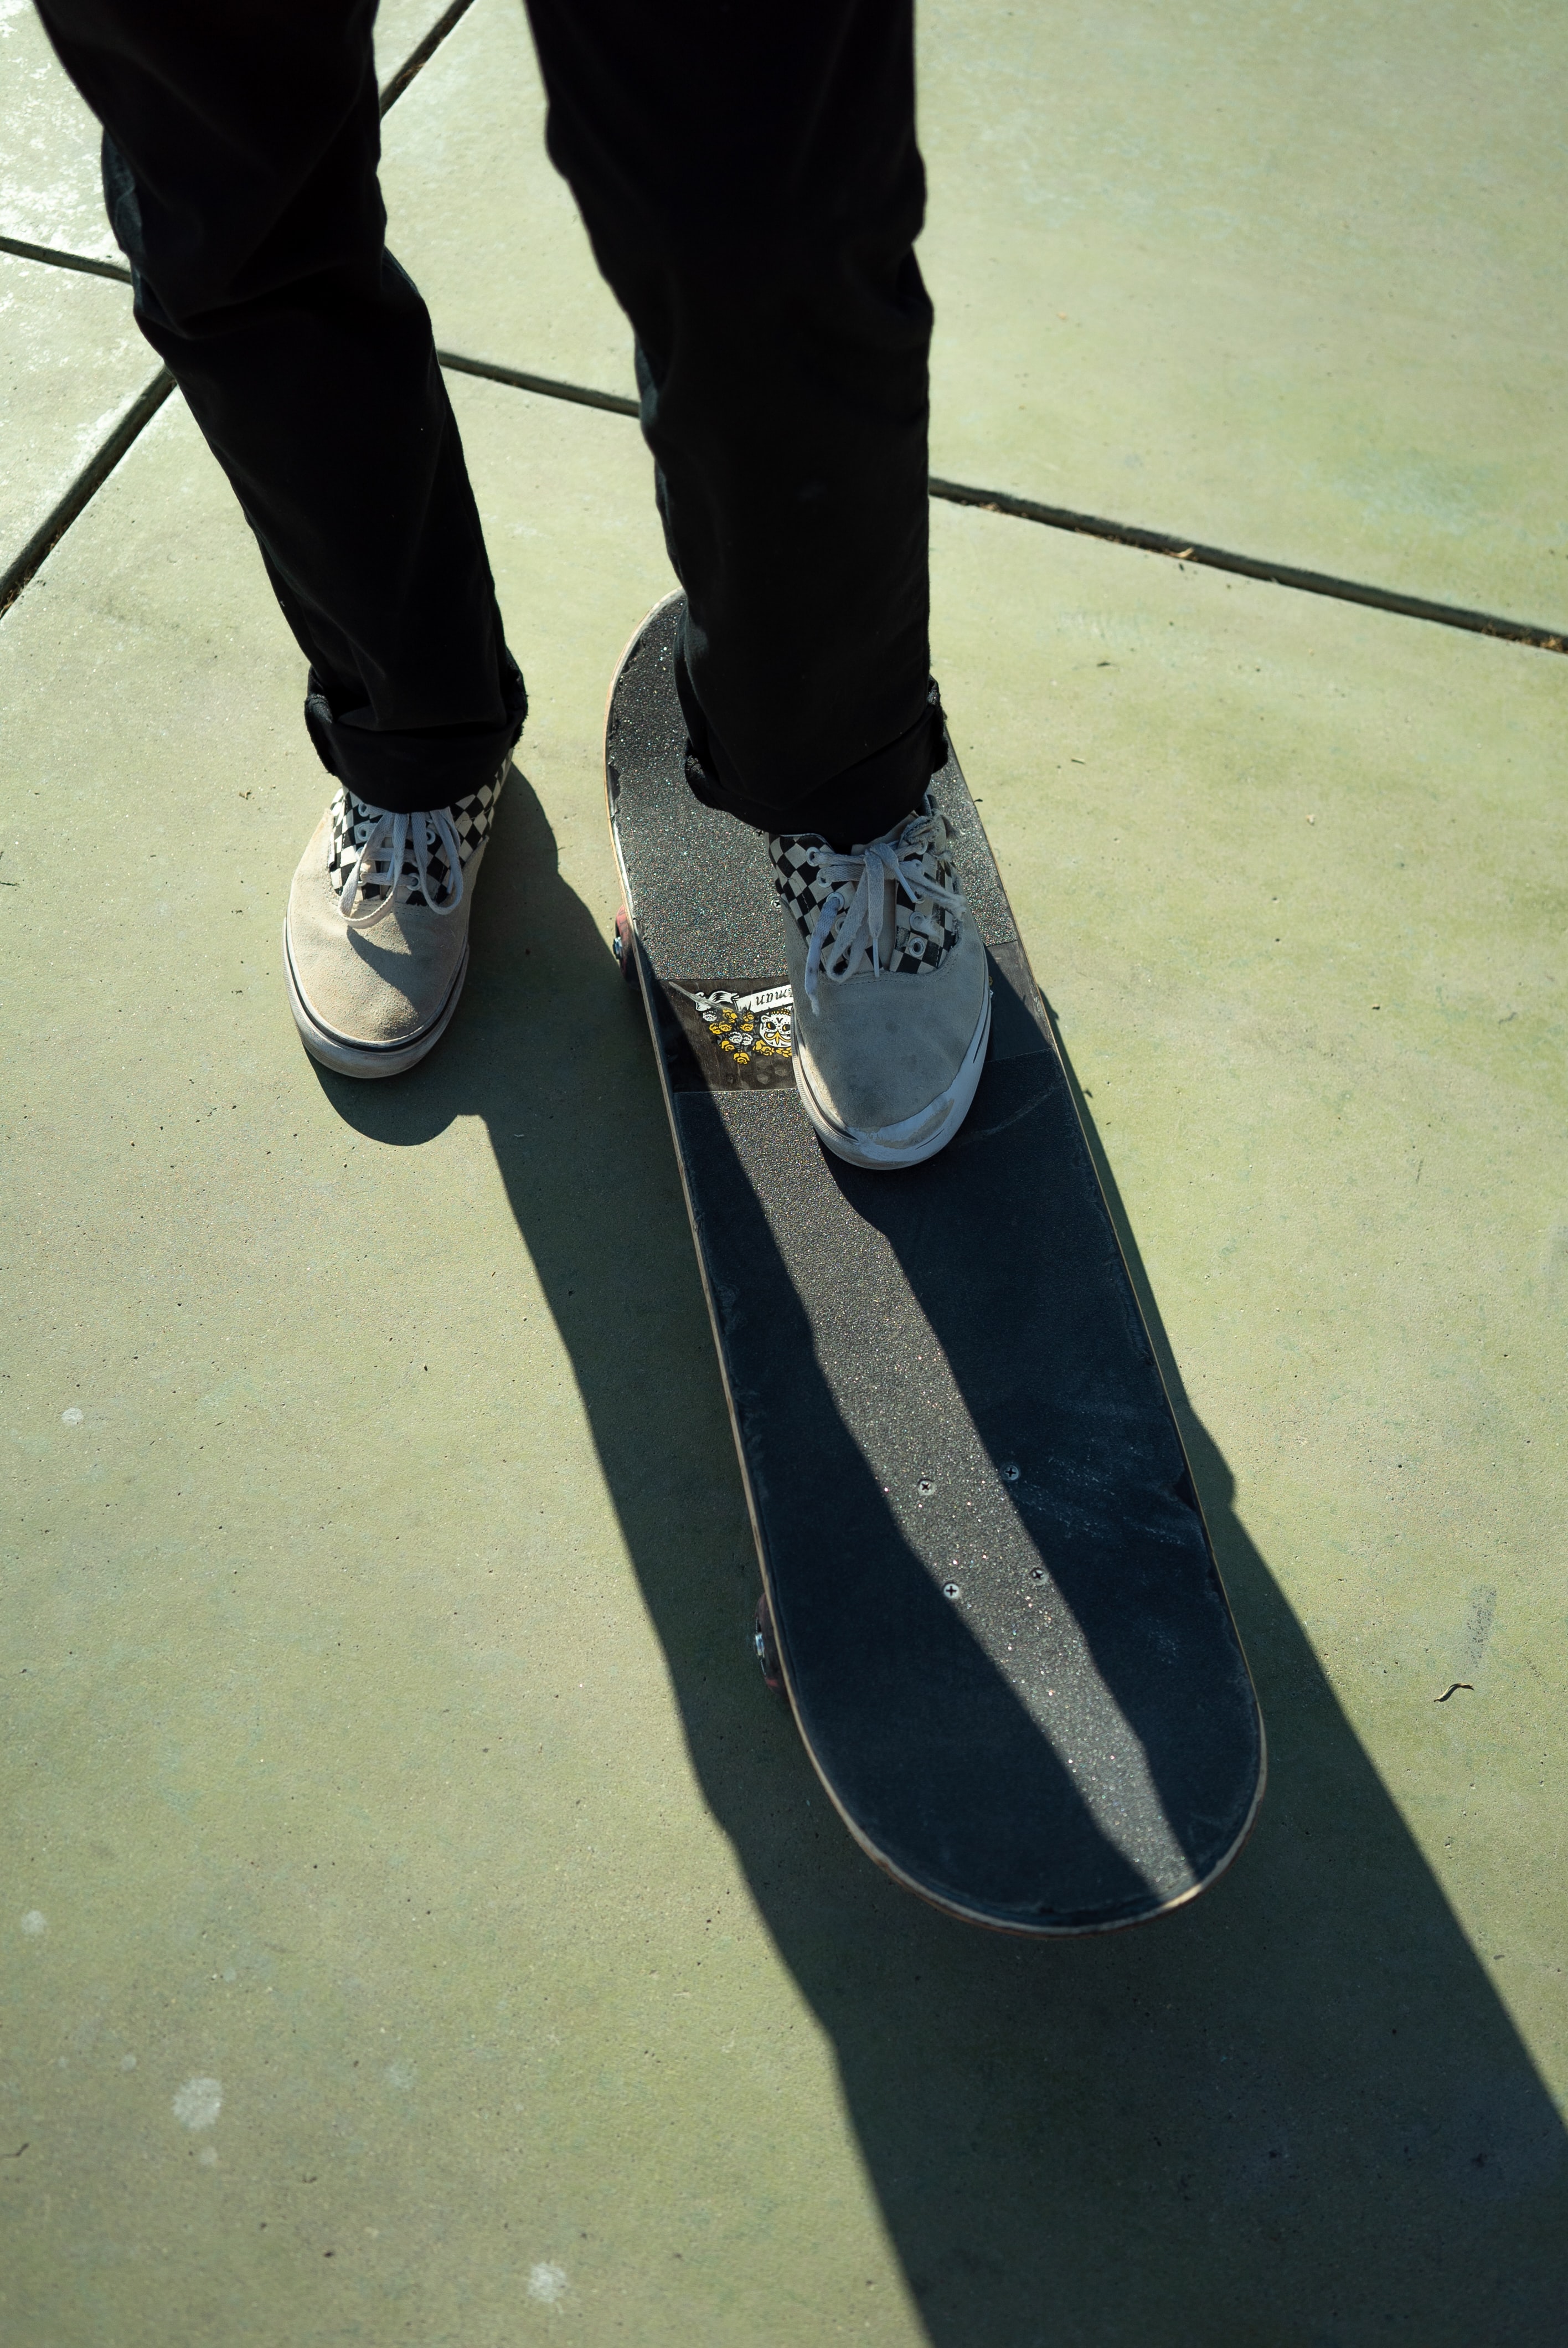 miscellanea, miscellaneous, legs, sneakers, style, shoes, skate, trousers